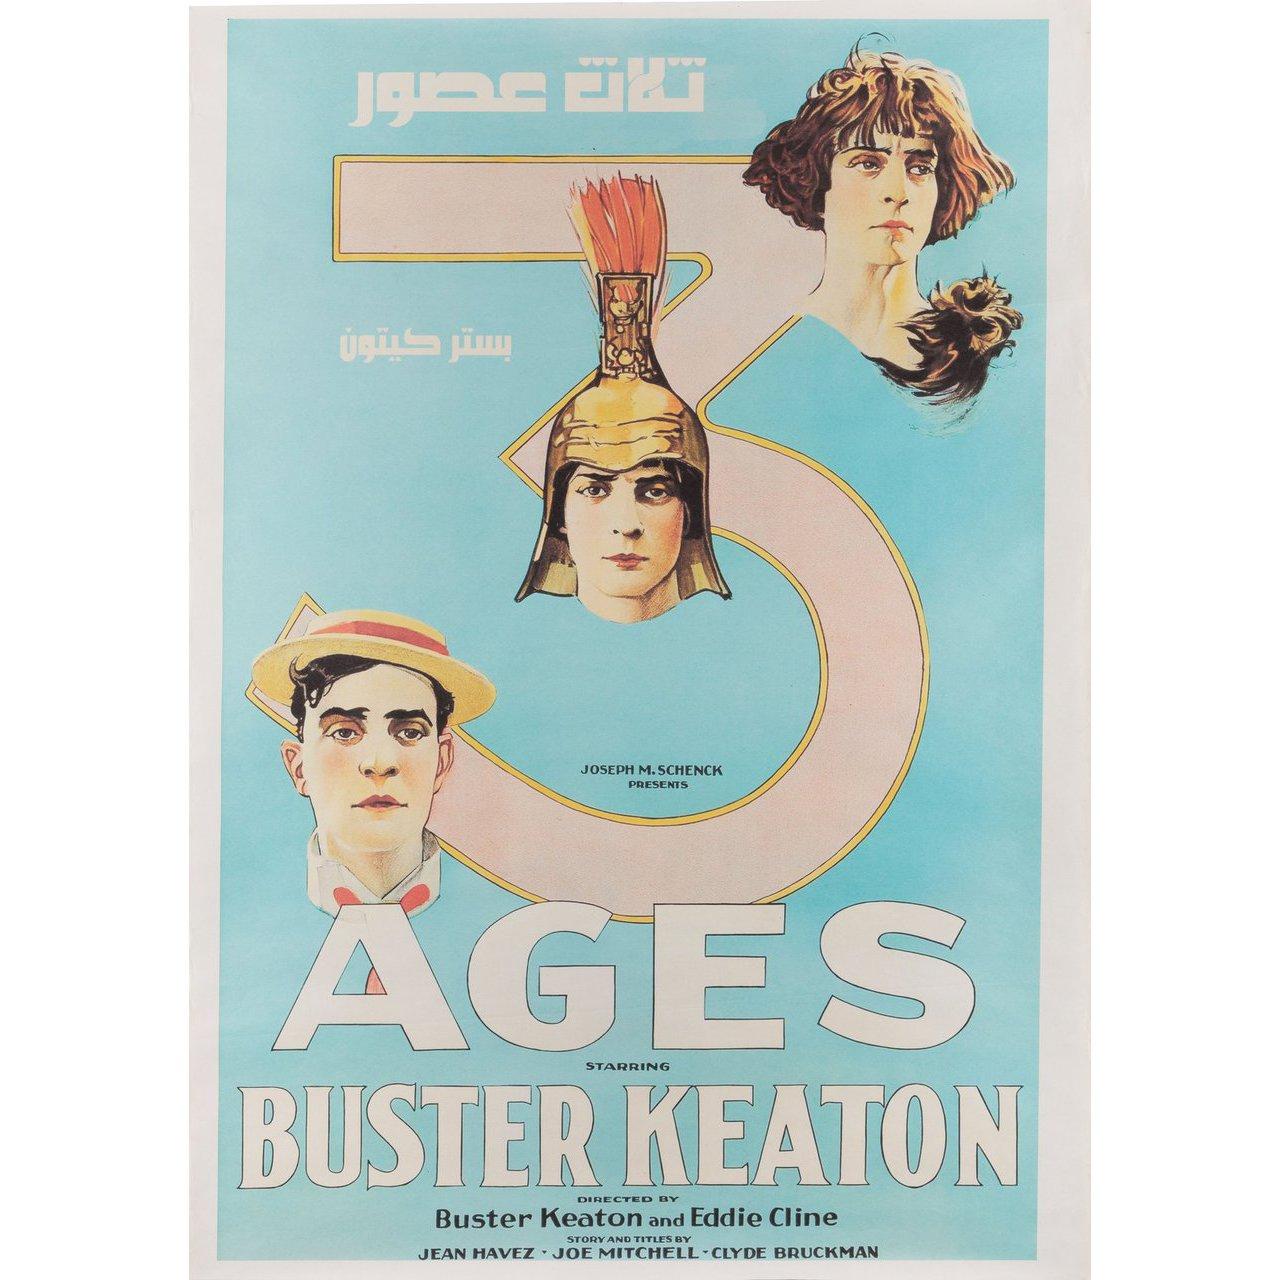 Original 2000s re-release Egyptian B1 poster for the 1923 film Three Ages directed by Edward F. Cline / Buster Keaton with Buster Keaton / Margaret Leahy / Wallace Beery / Joe Roberts. Very Good-Fine condition, rolled. Please note: the size is